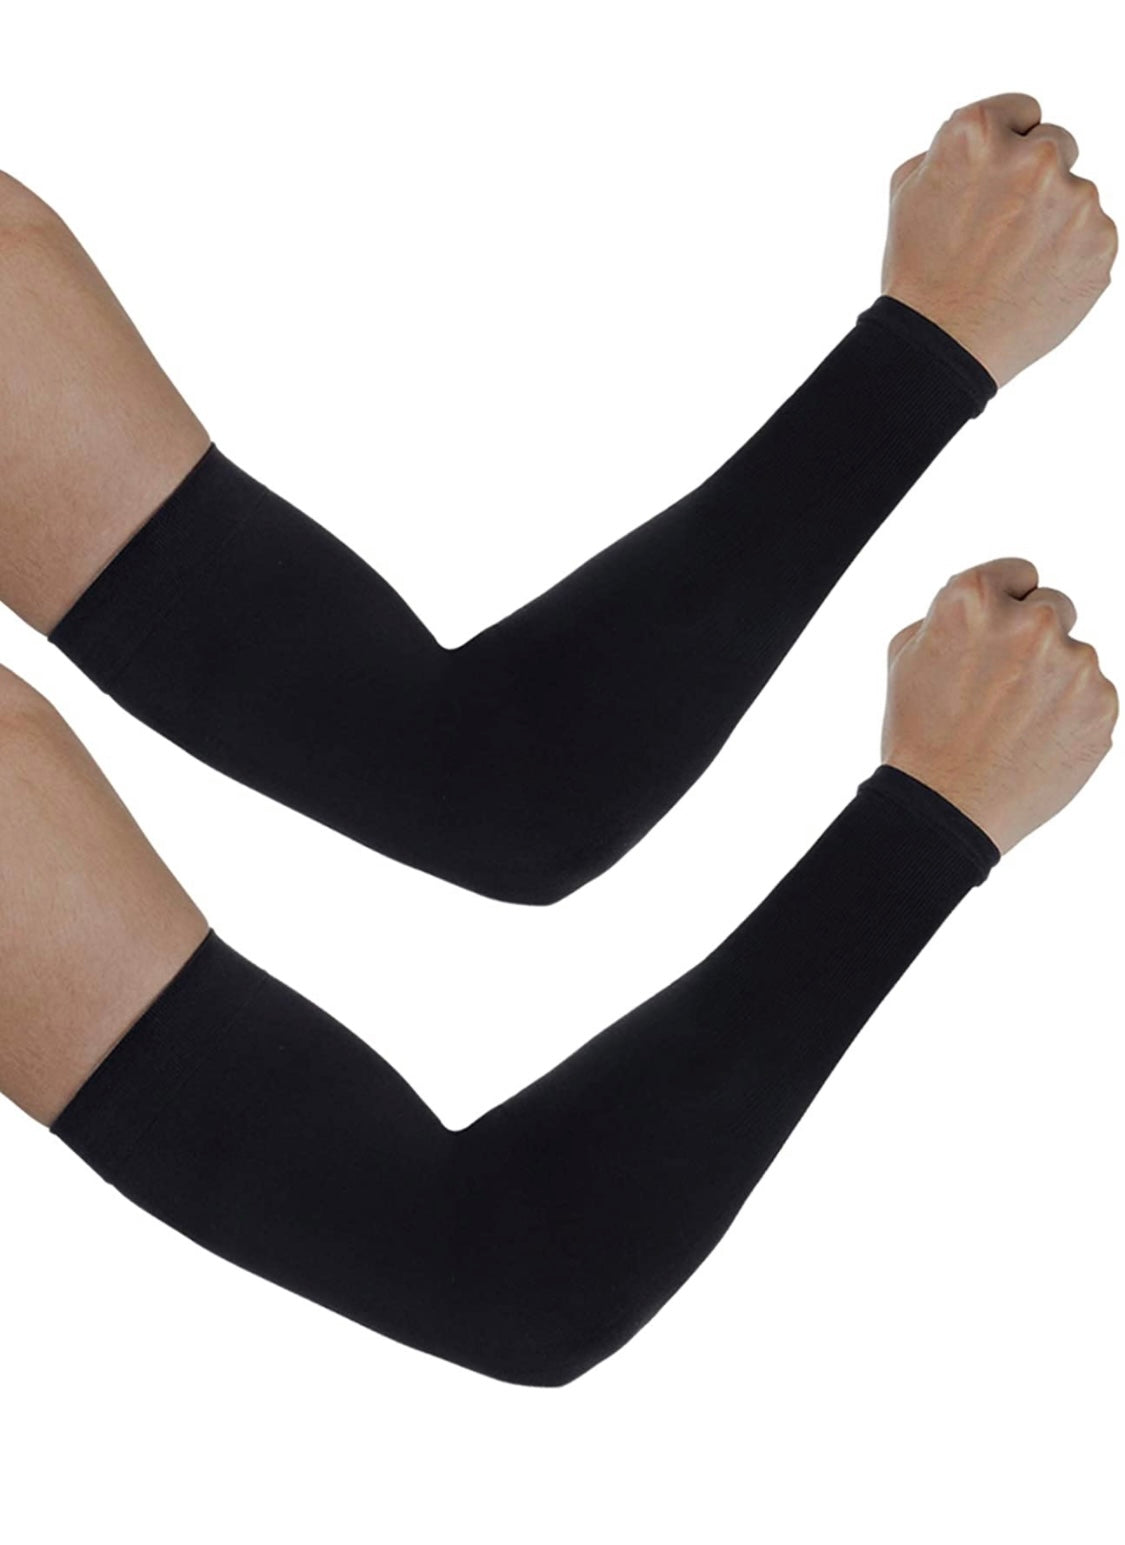 2 -Pairs Arm Sleeves for Men and Women - Tattoo Cover Up - Cooling Sports Sleeve for Basketball Golf Football